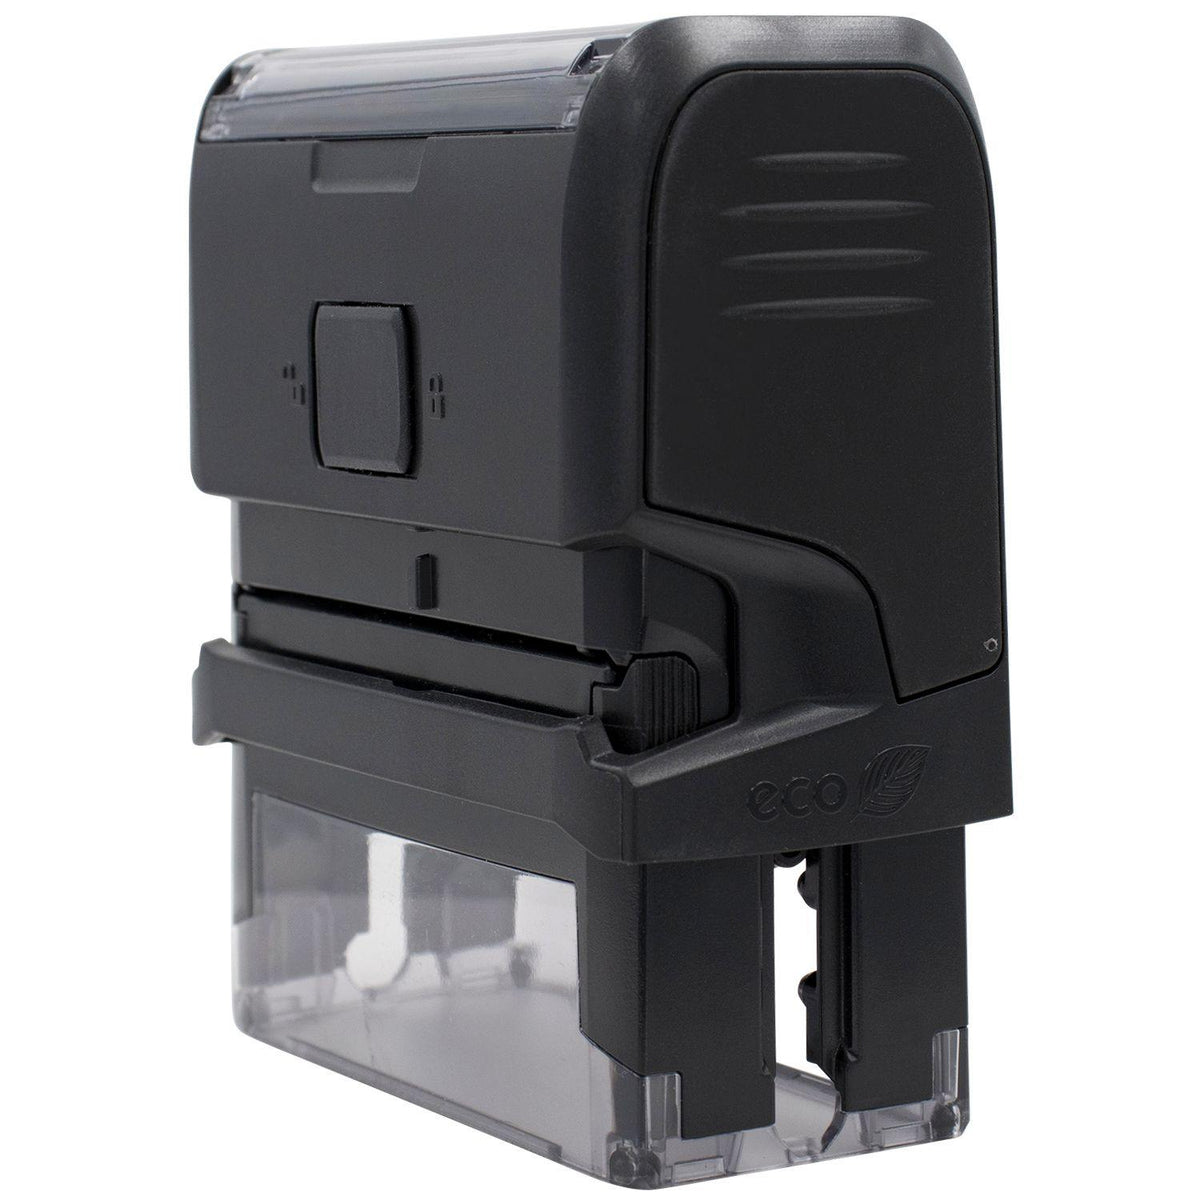 Side View of Large Self-Inking Contado Stamp at an Angle